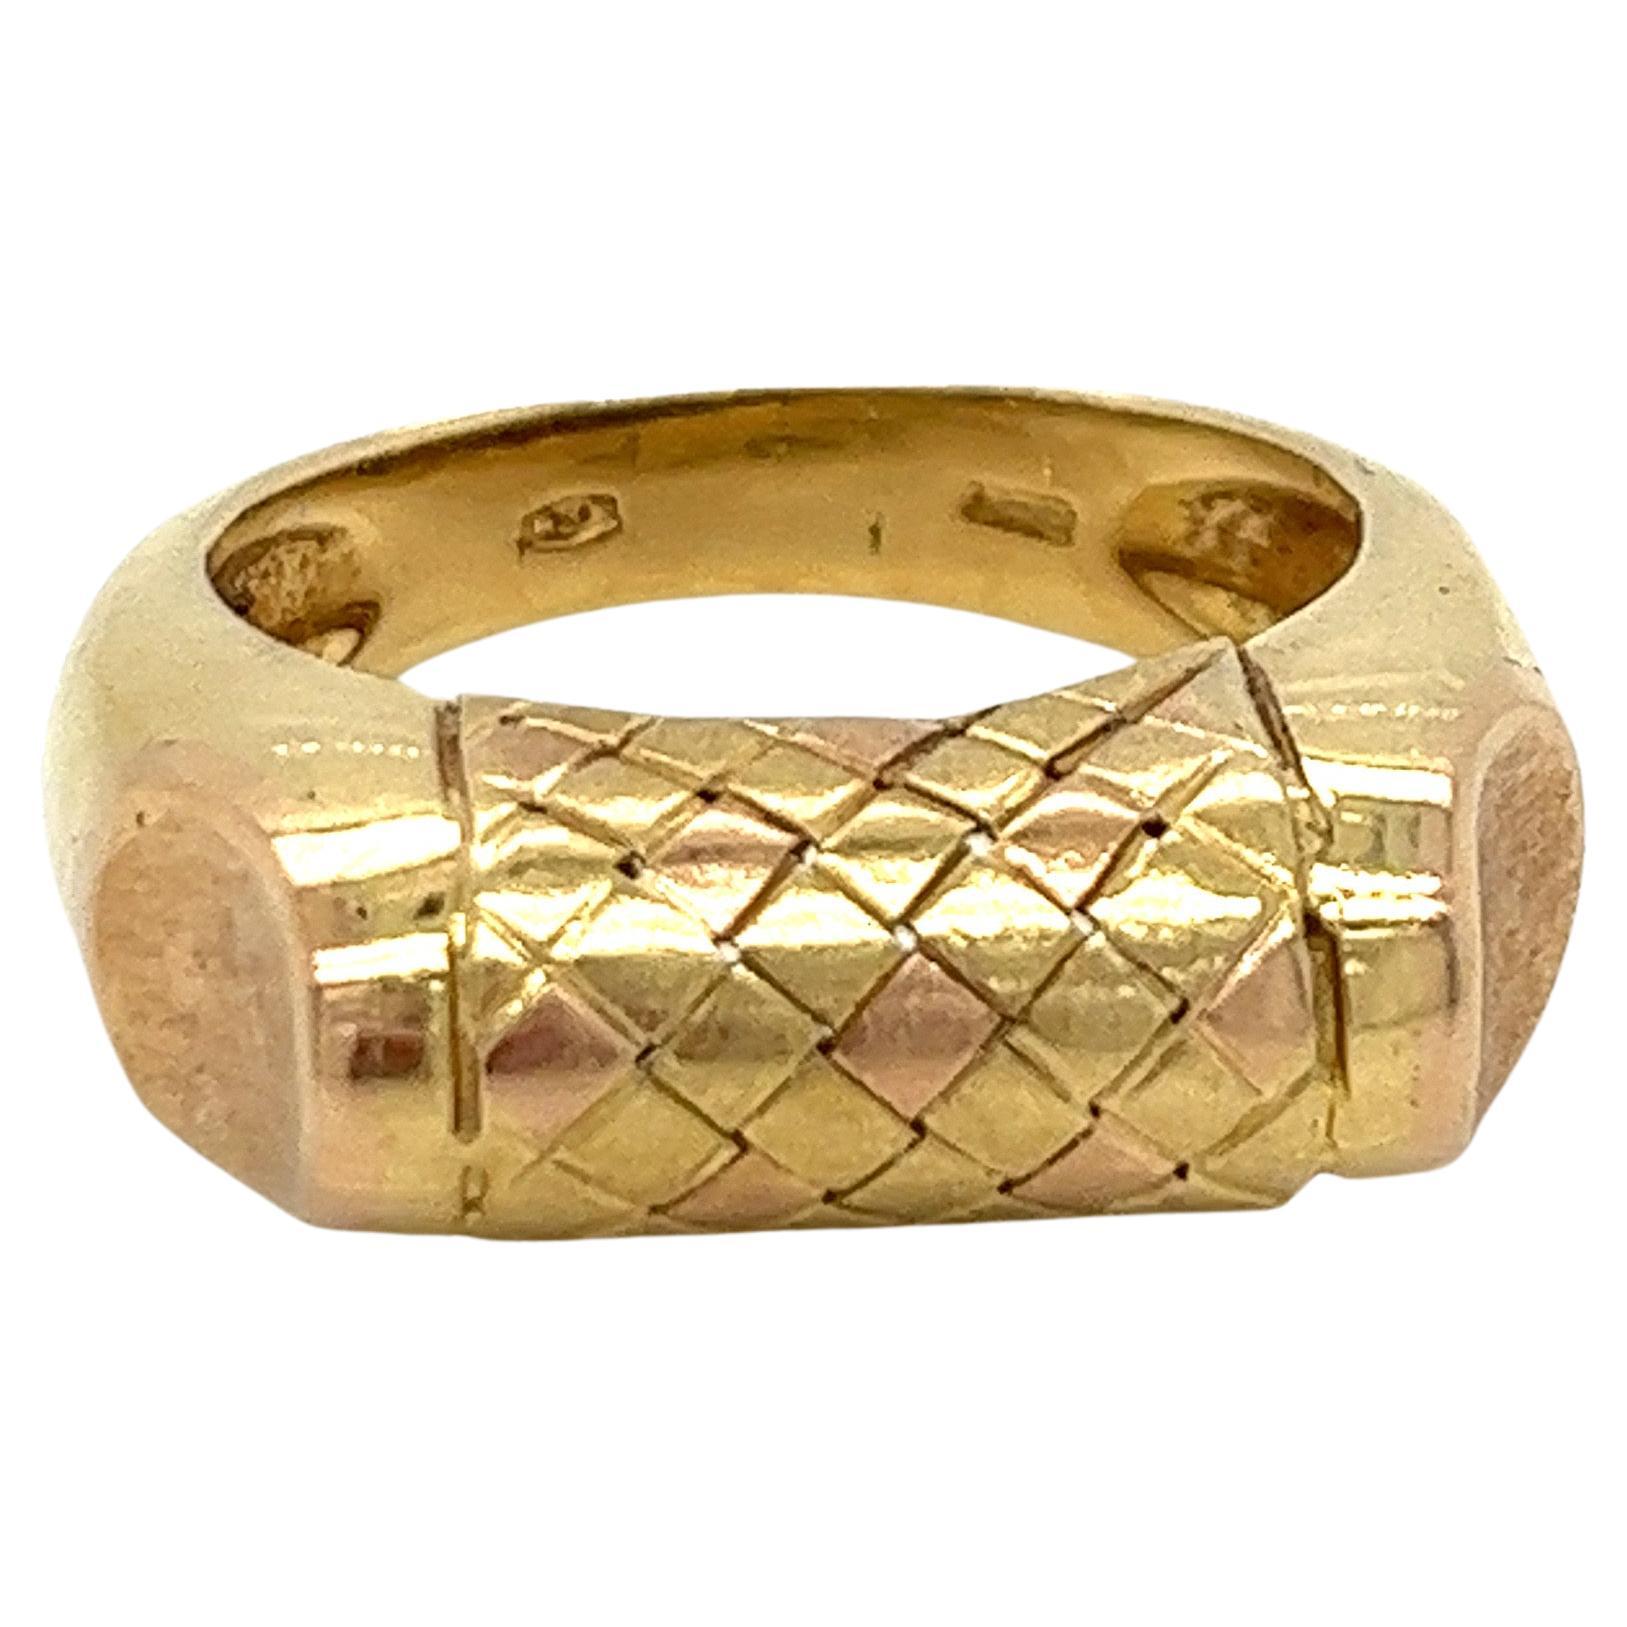 Vintage 1980's 18k Yellow Gold and Rose Gold Statement Ring. The center design has a brushed finish basket weave of rose gold and yellow gold. The side accents are brushed finish rose gold and the rest of the ring is shiny yellow gold. The width of